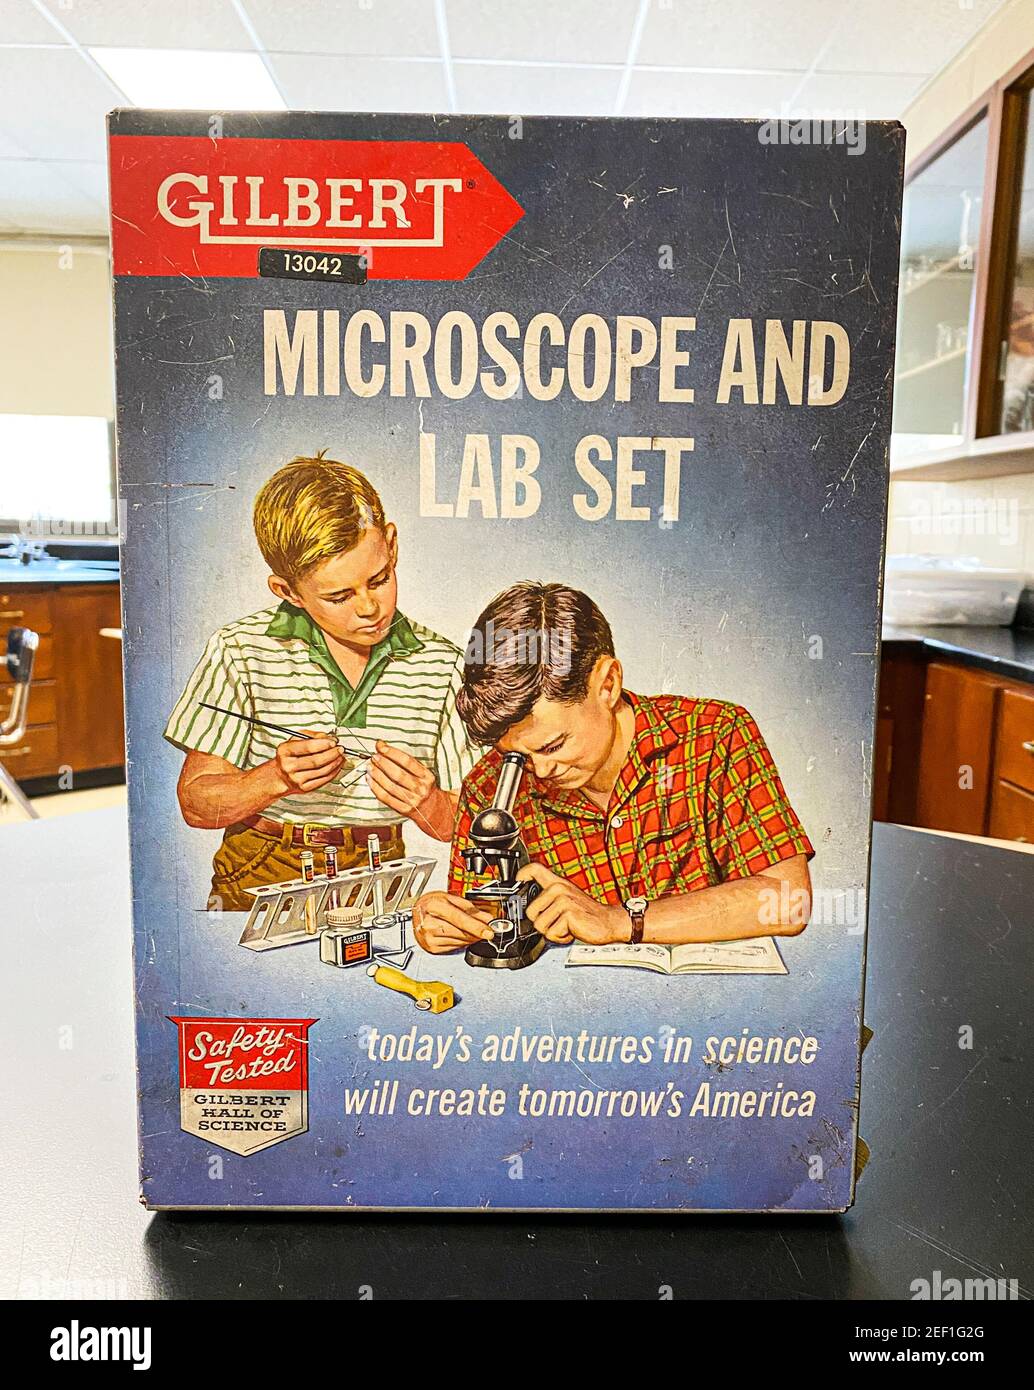 West Islip, New York, USA - 5 February 2021: A vintage Gilbert Microscope and Lab set in a high school science lab room. Stock Photo